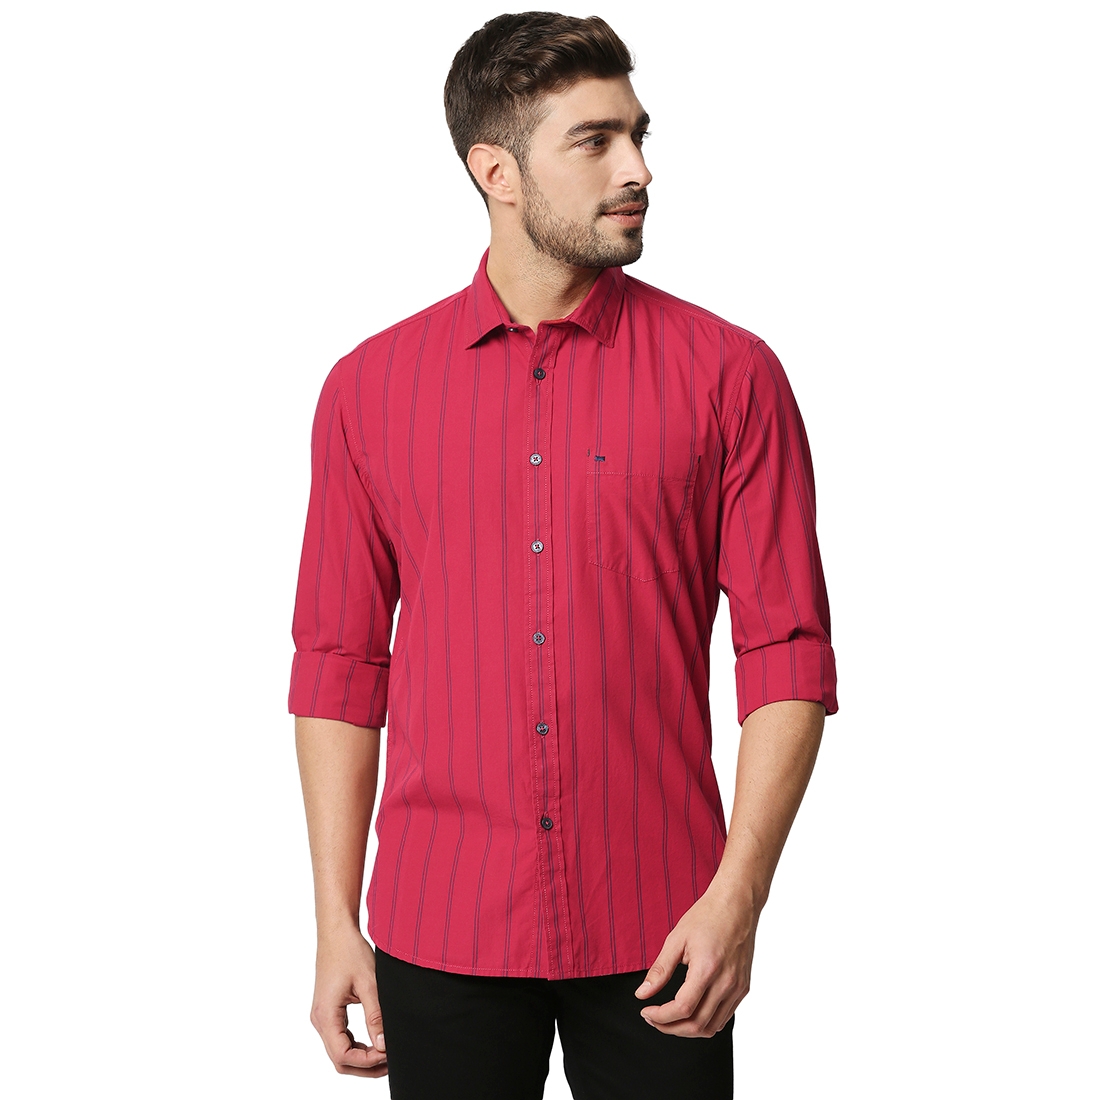 Basics | Men's Red Cotton Striped Casual Shirt 0